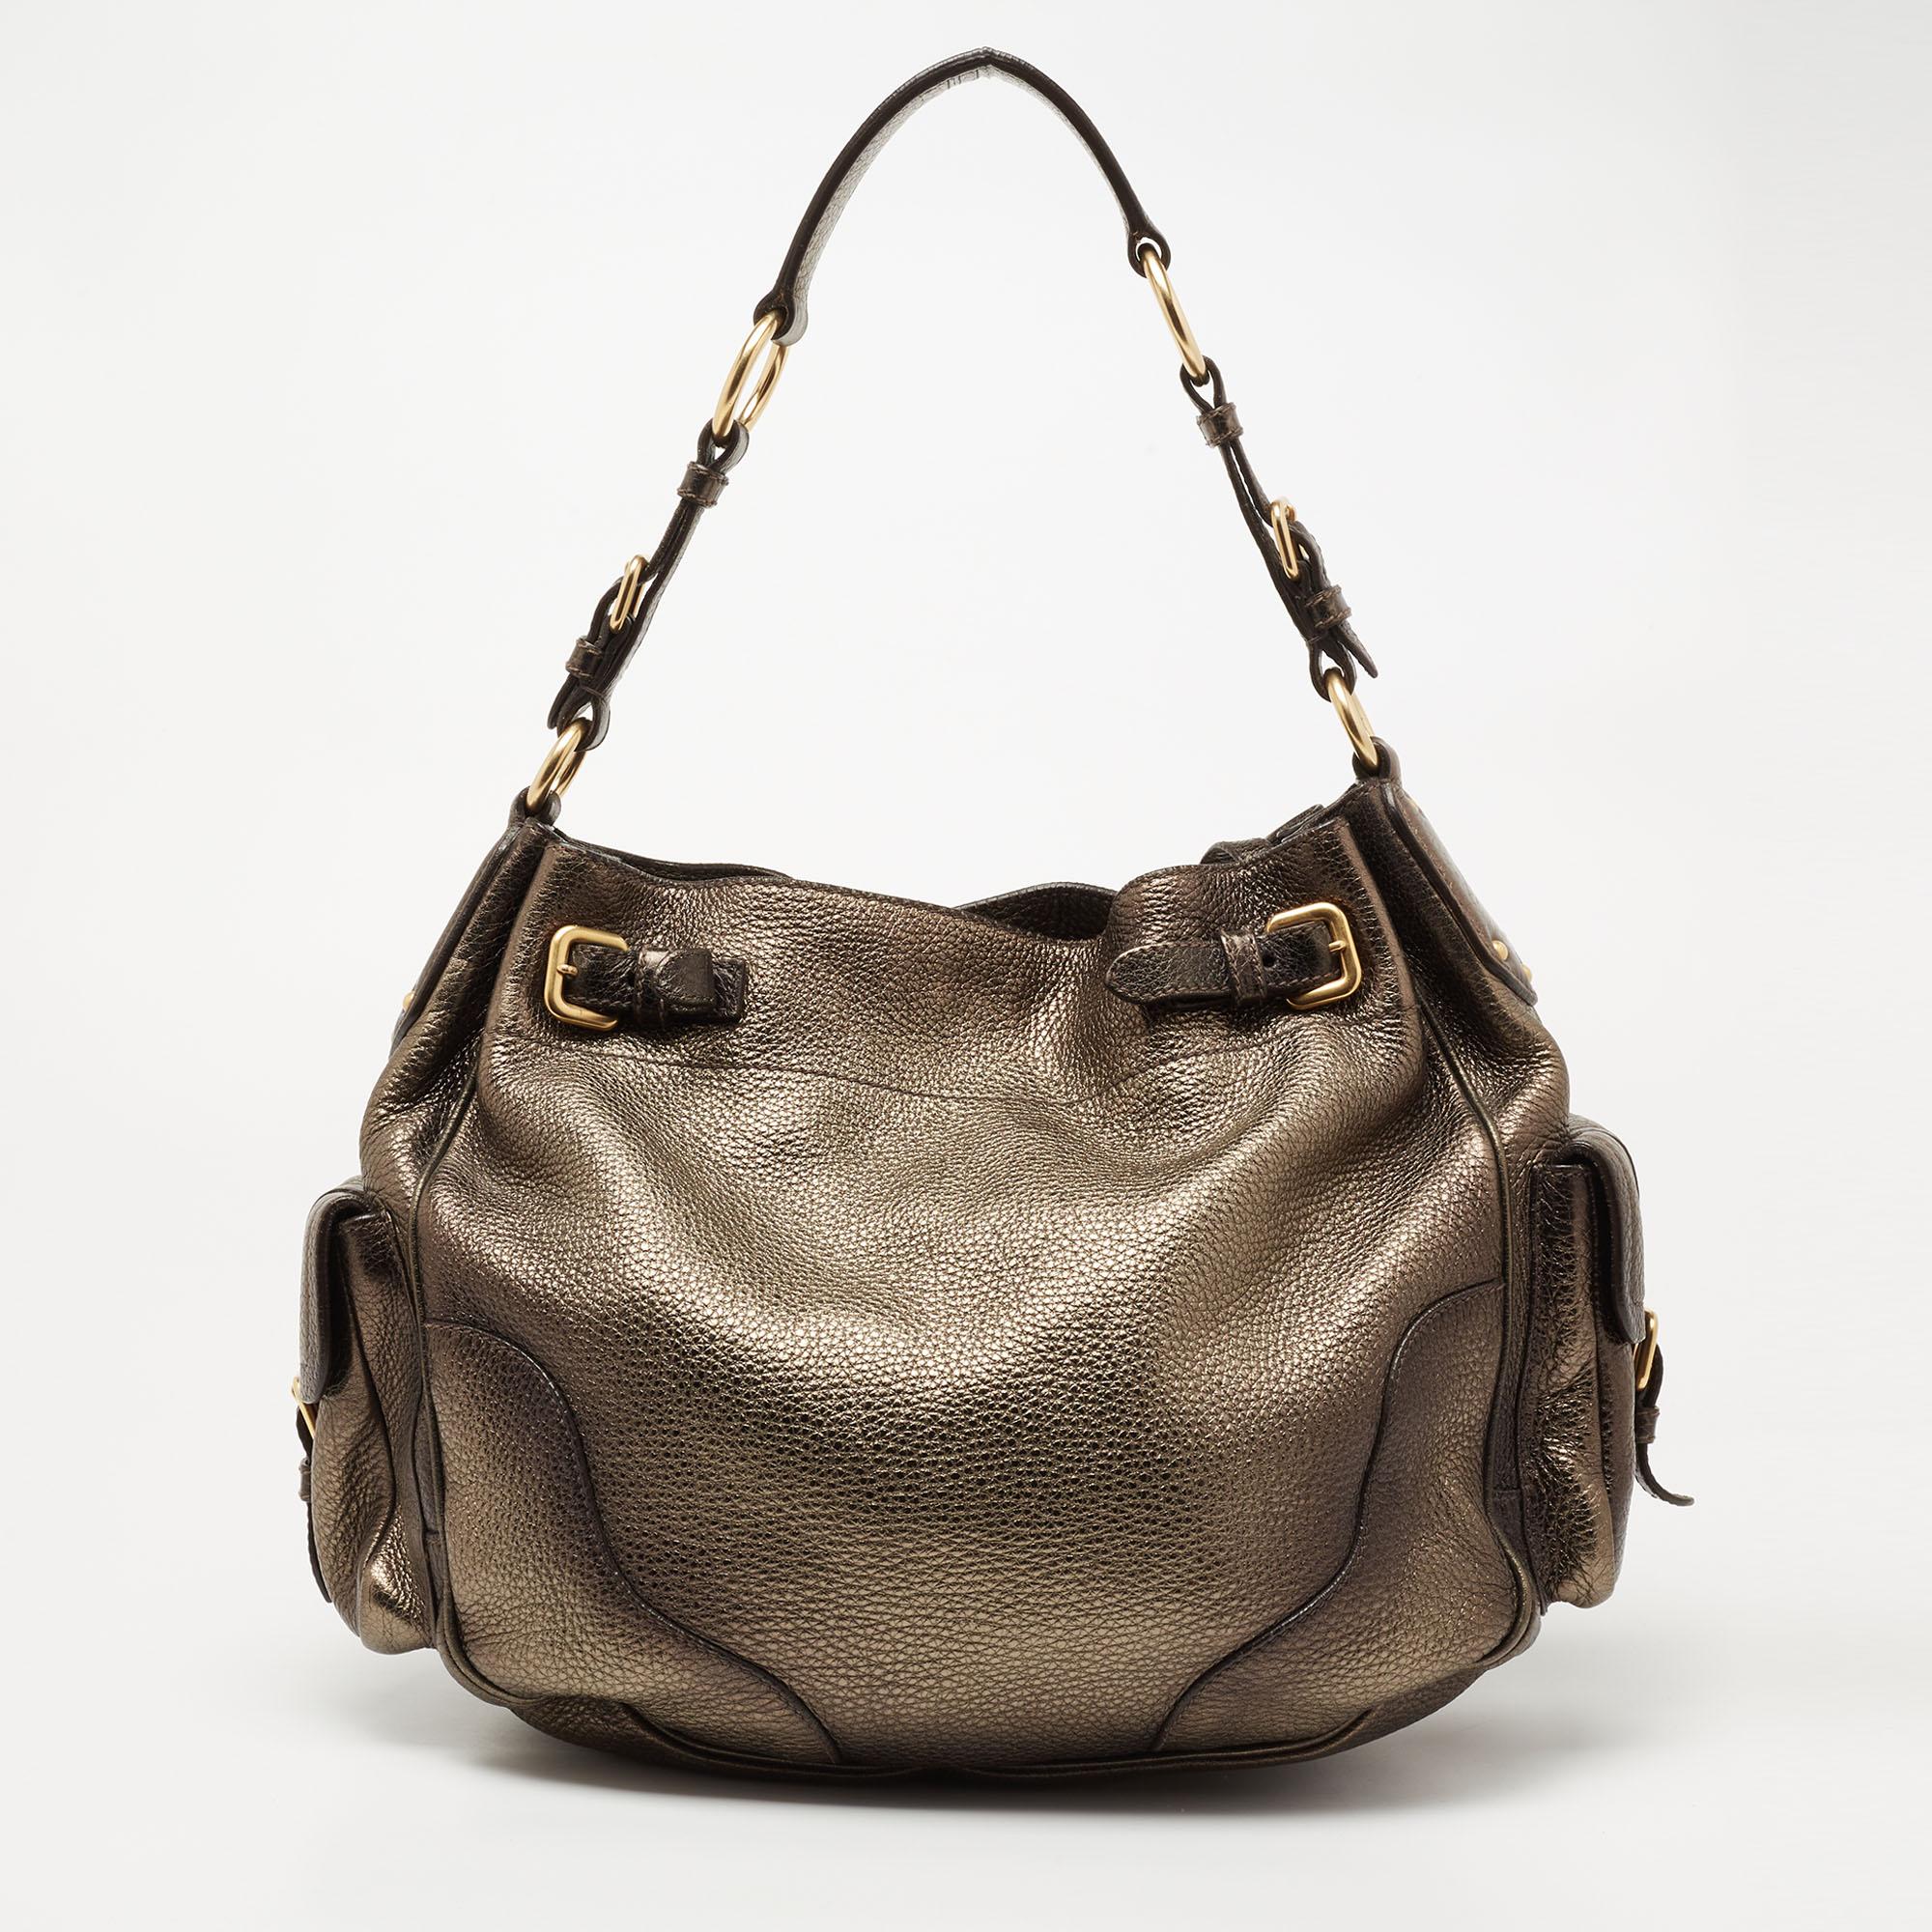 This hobo from the House of Prada is absolutely gorgeous! Made from metallic Moss Vitello Daino leather, this hobo is highlighted with gold-tone hardware and a single handle. It accommodates a roomy nylon-lined interior. Carry this hobo and flaunt a